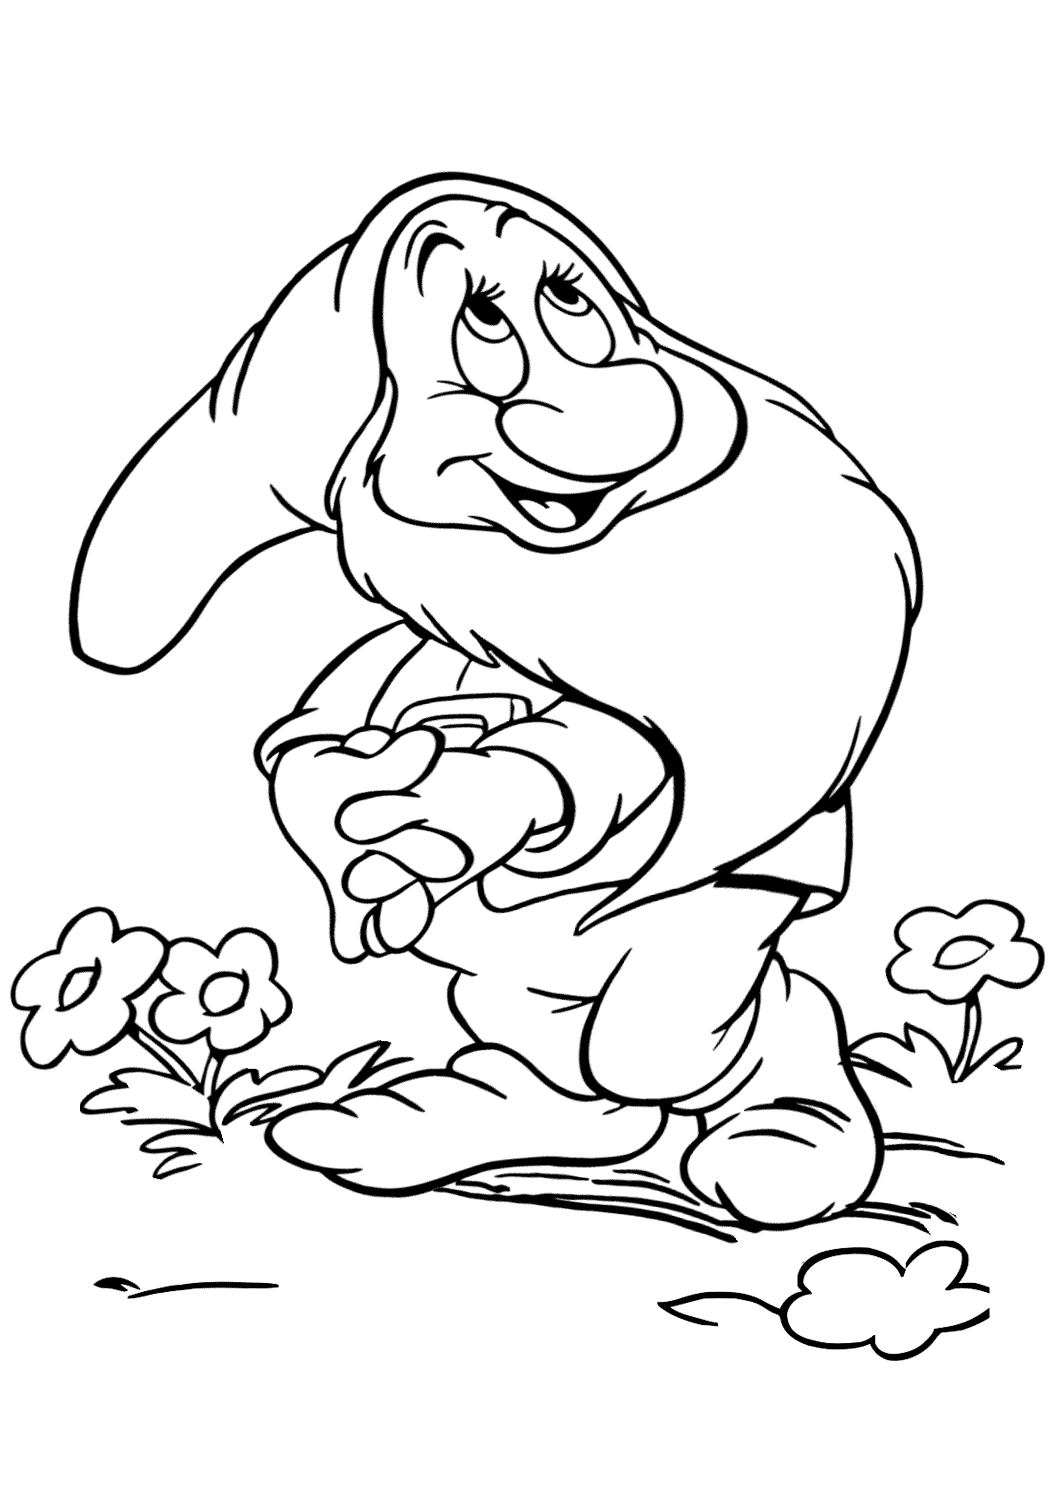 Kindness Coloring Pages Kindness Coloring Pages Coloring Pages To Download And Print